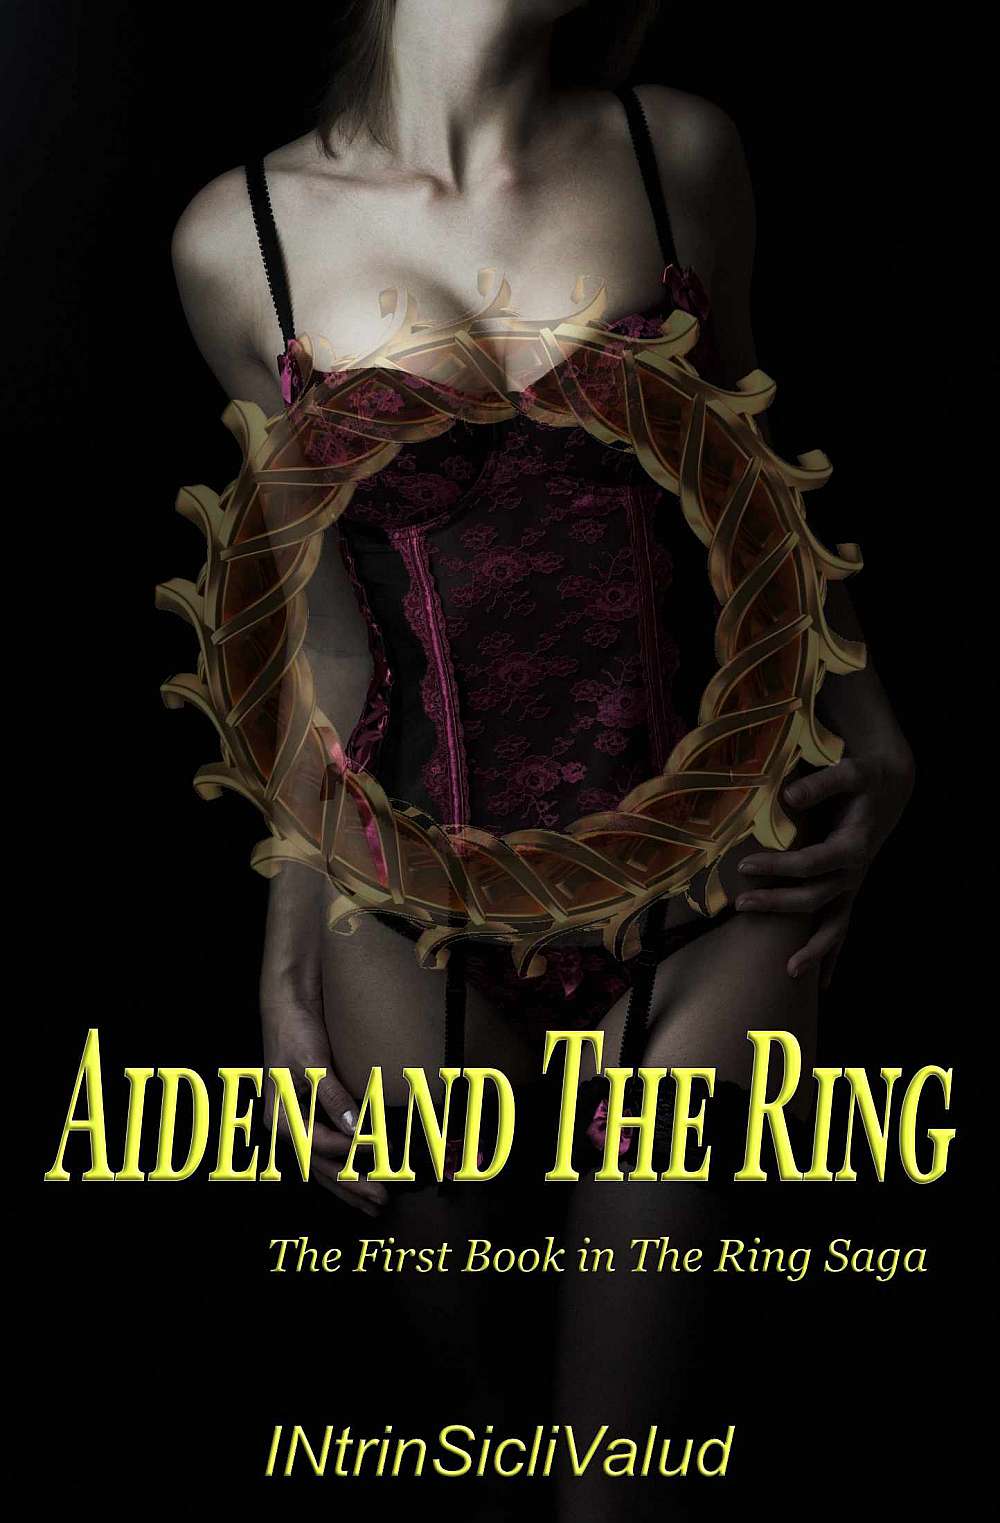 aiden-and-the-ring-cover-new.jpg